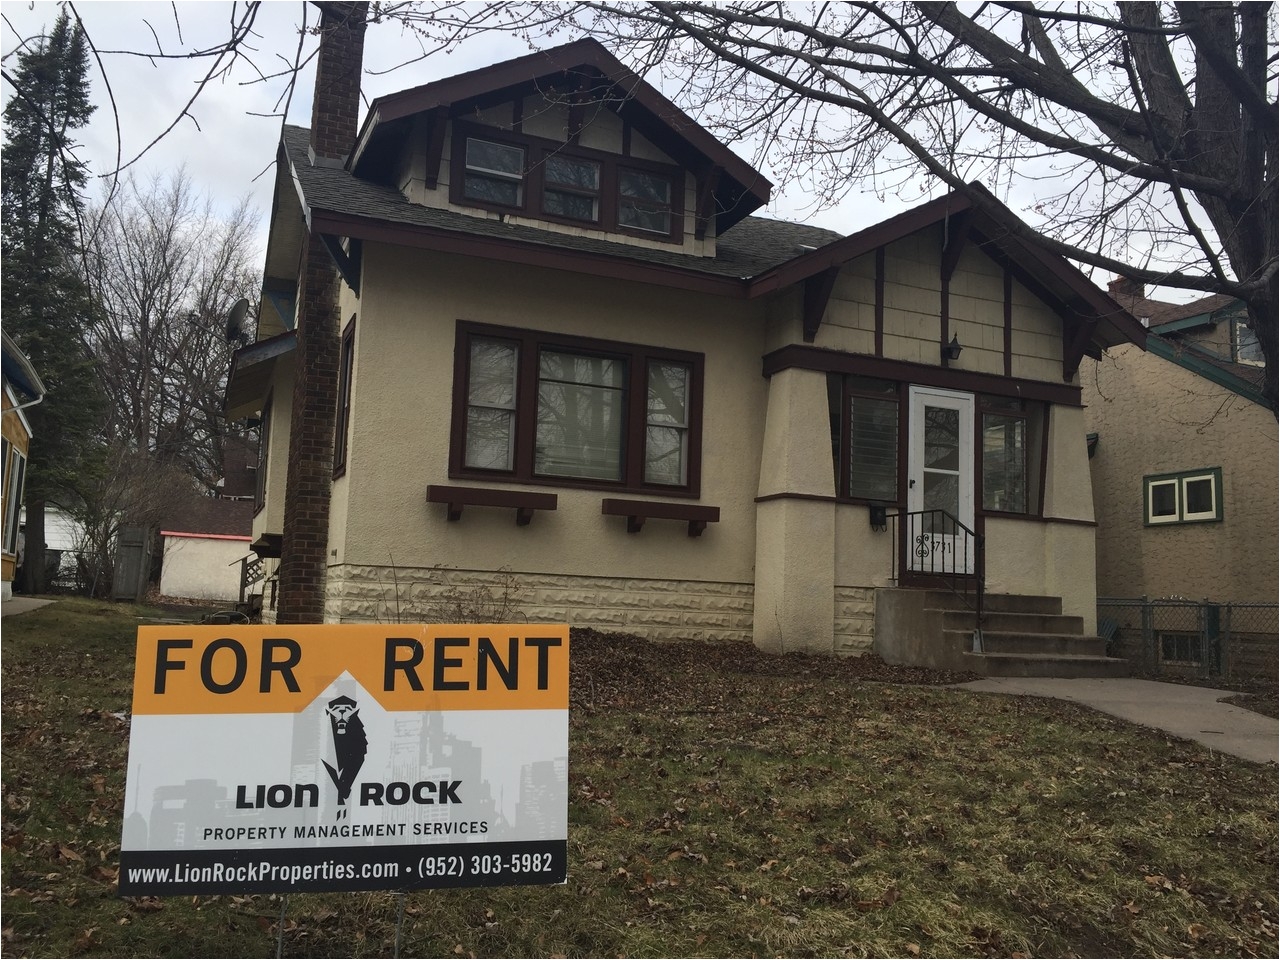 3731 queen avenue north minneapolis mn 55412 4 bedroom house for rent for 1 385 month zumper